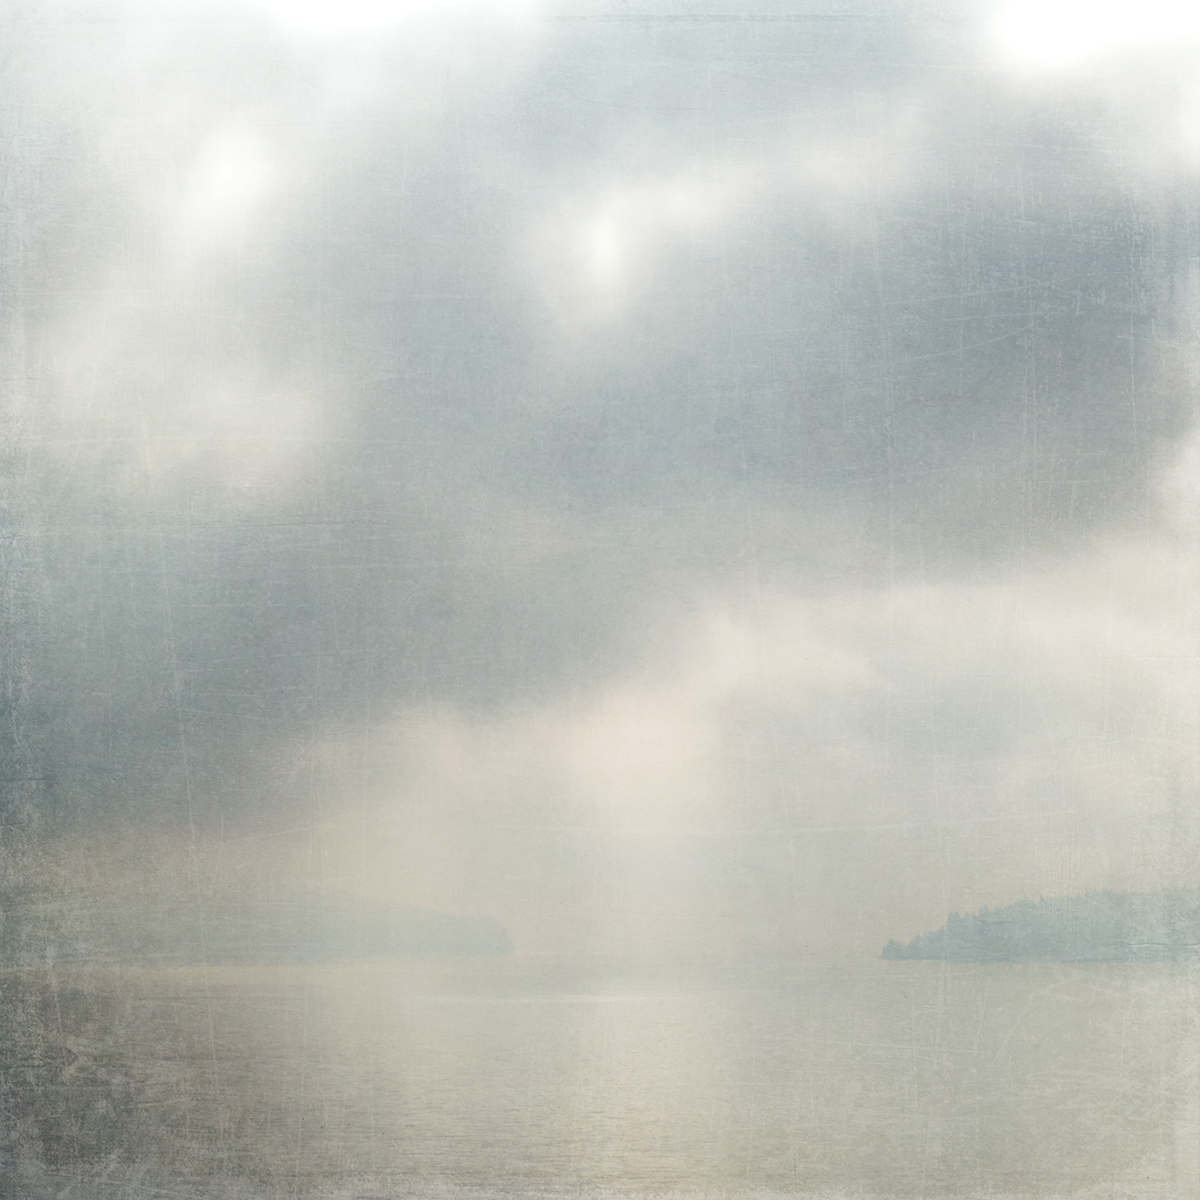 seascape misty cloudy atmospheric Puget Sound Colvos Passage Sally Banfill textured photos